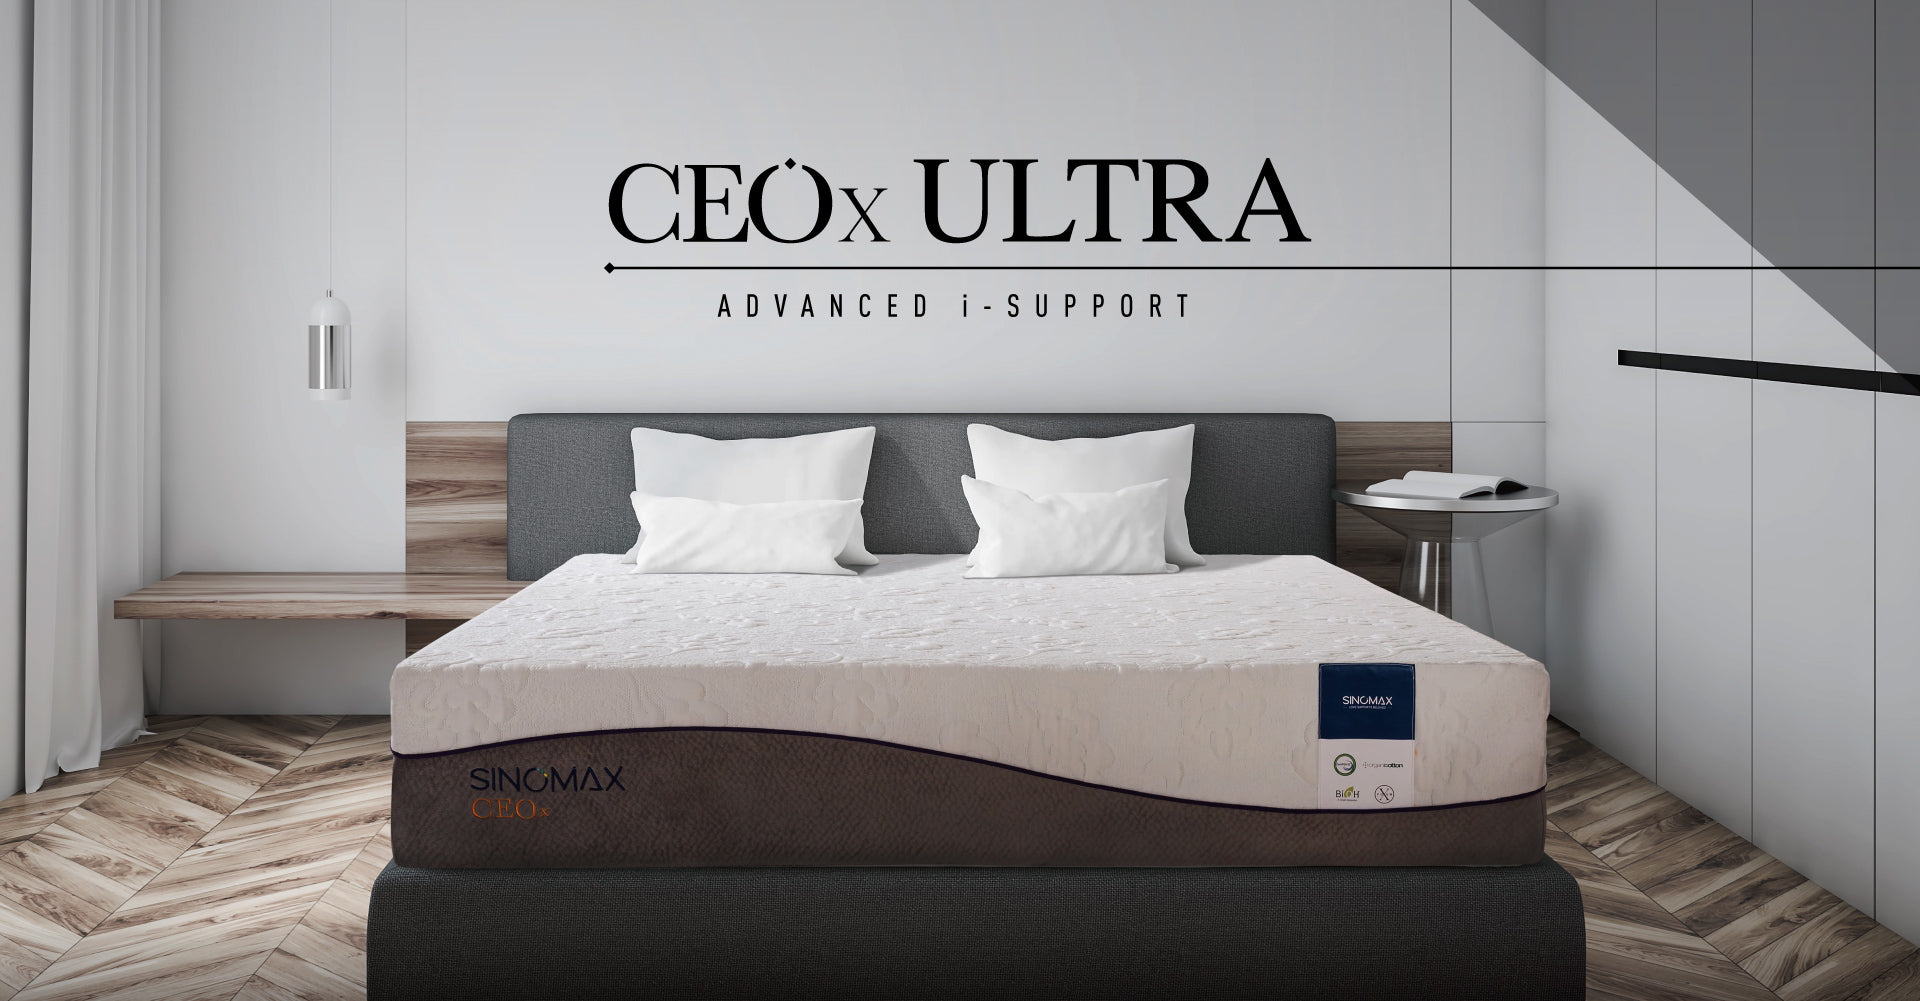 CEOx ULTRA Mattress - Tailor-made Size (48"W or below)
